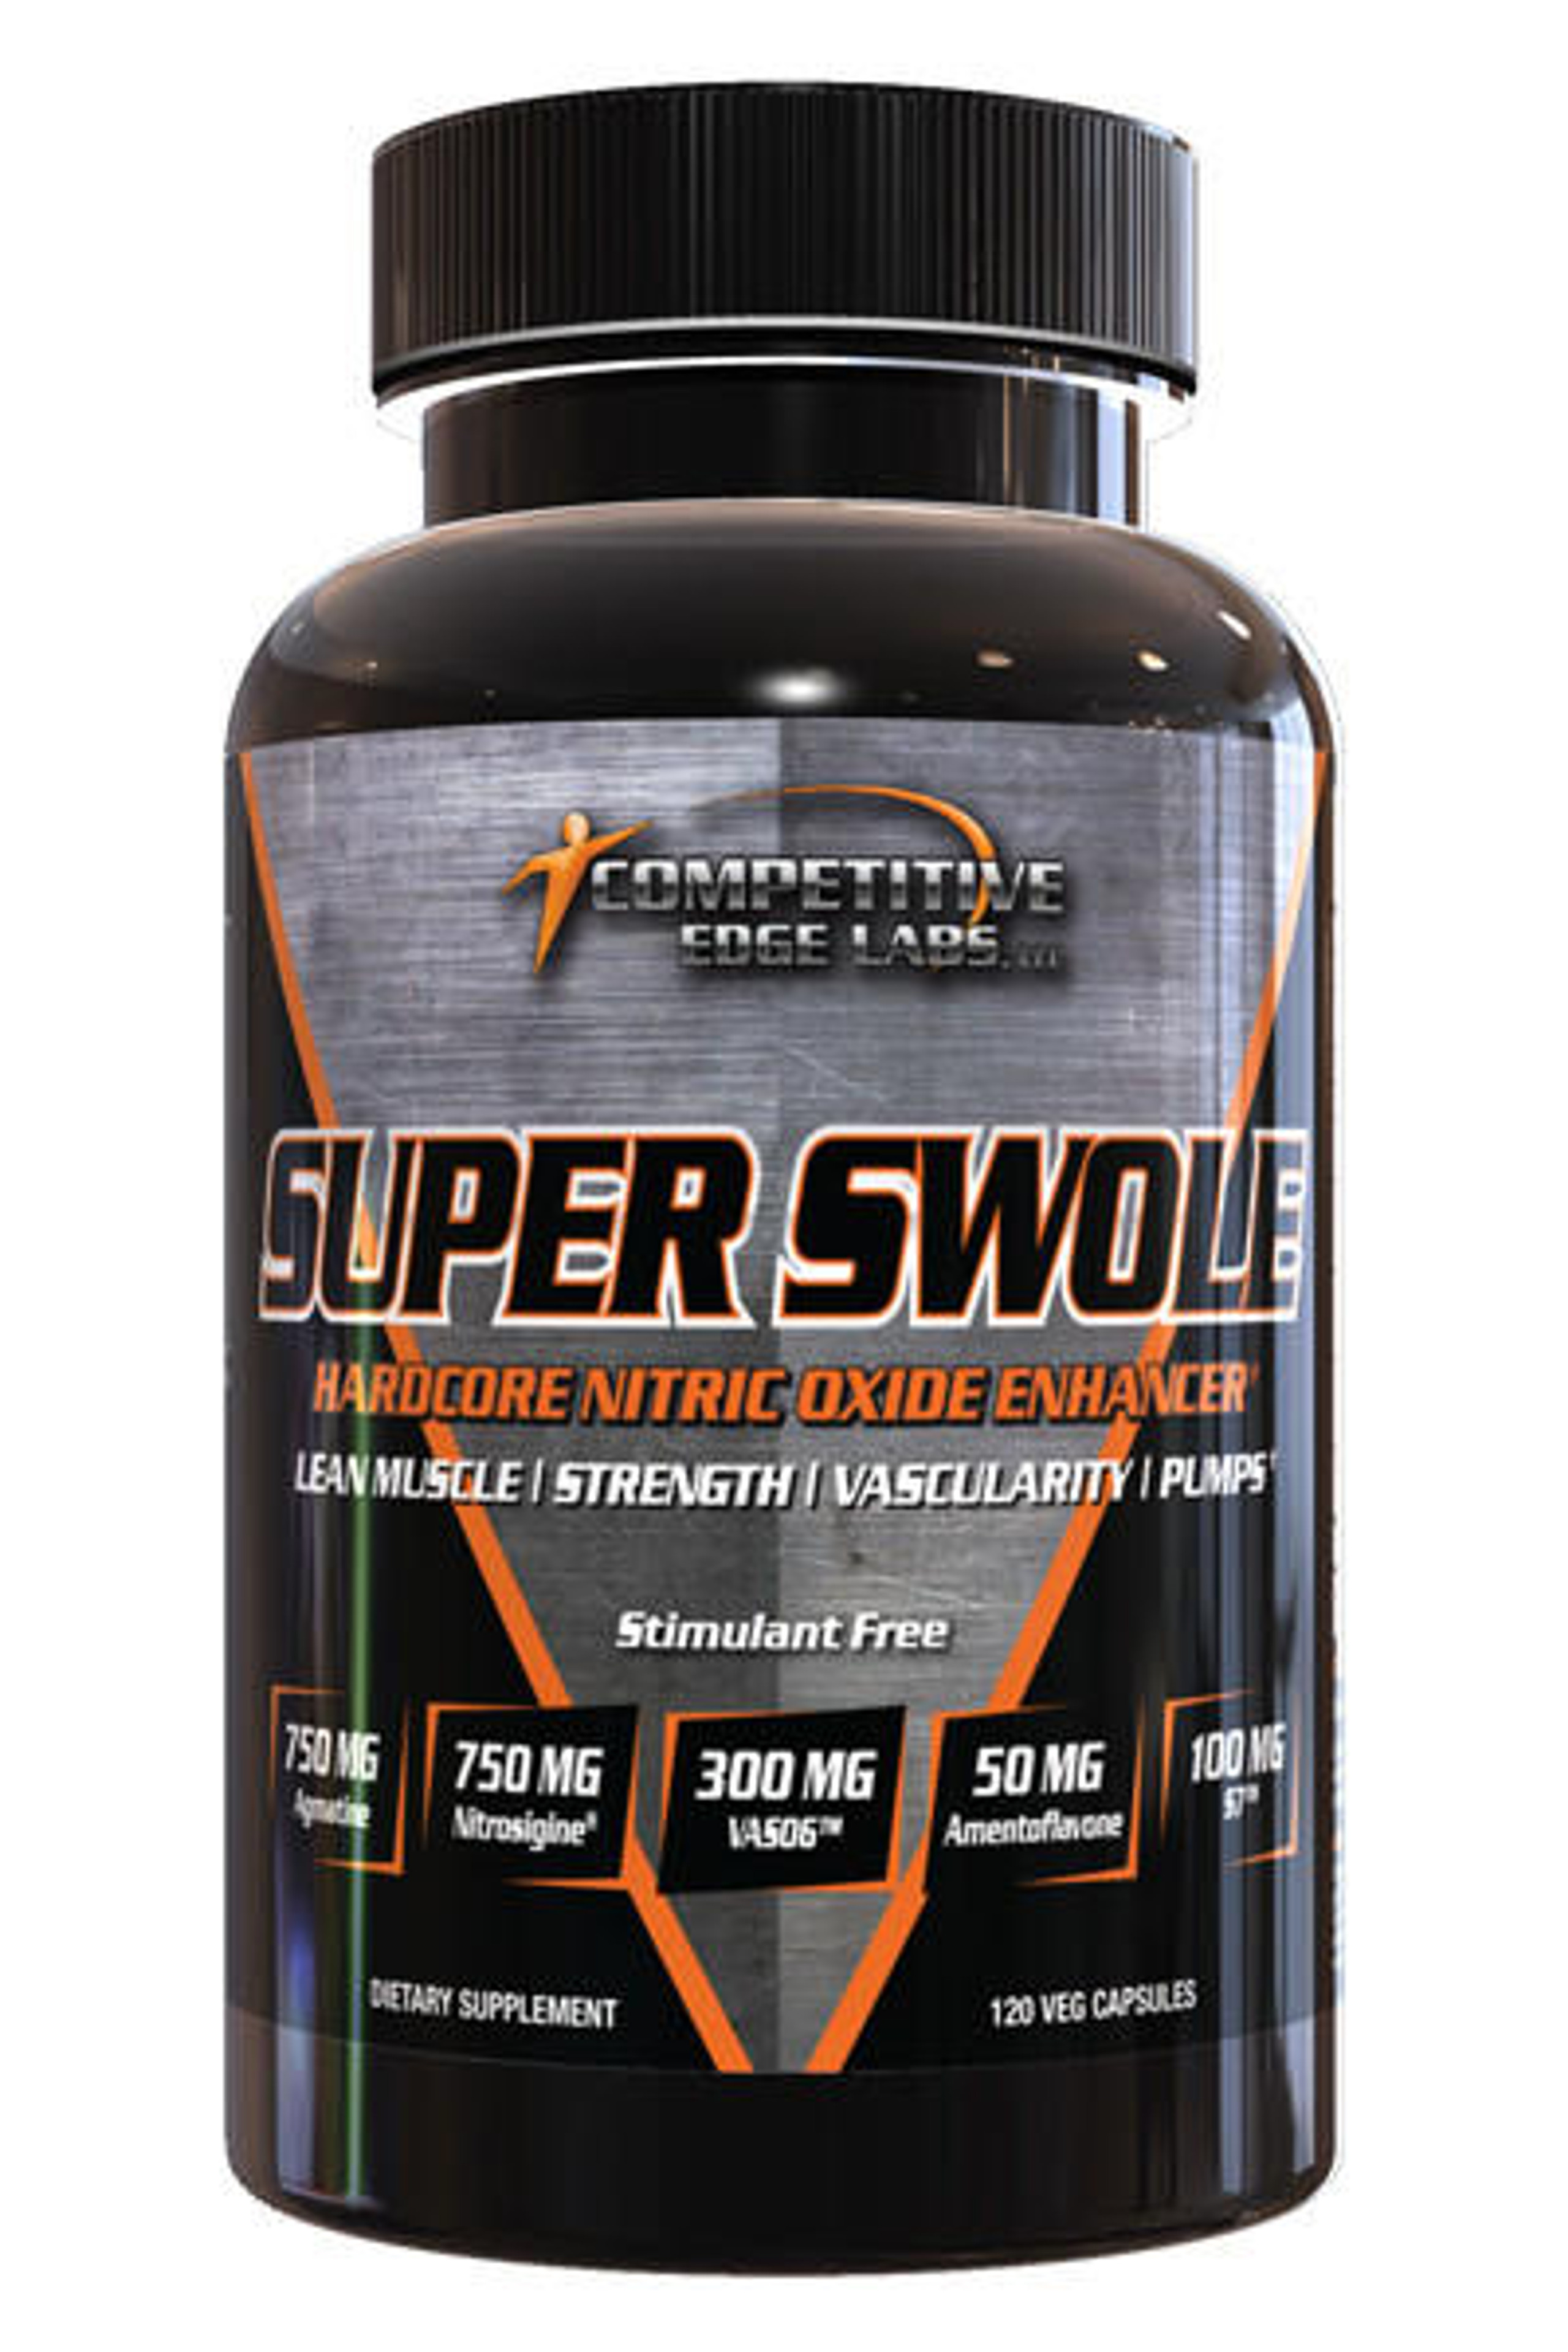 Super Swole by Competitive Edge Labs